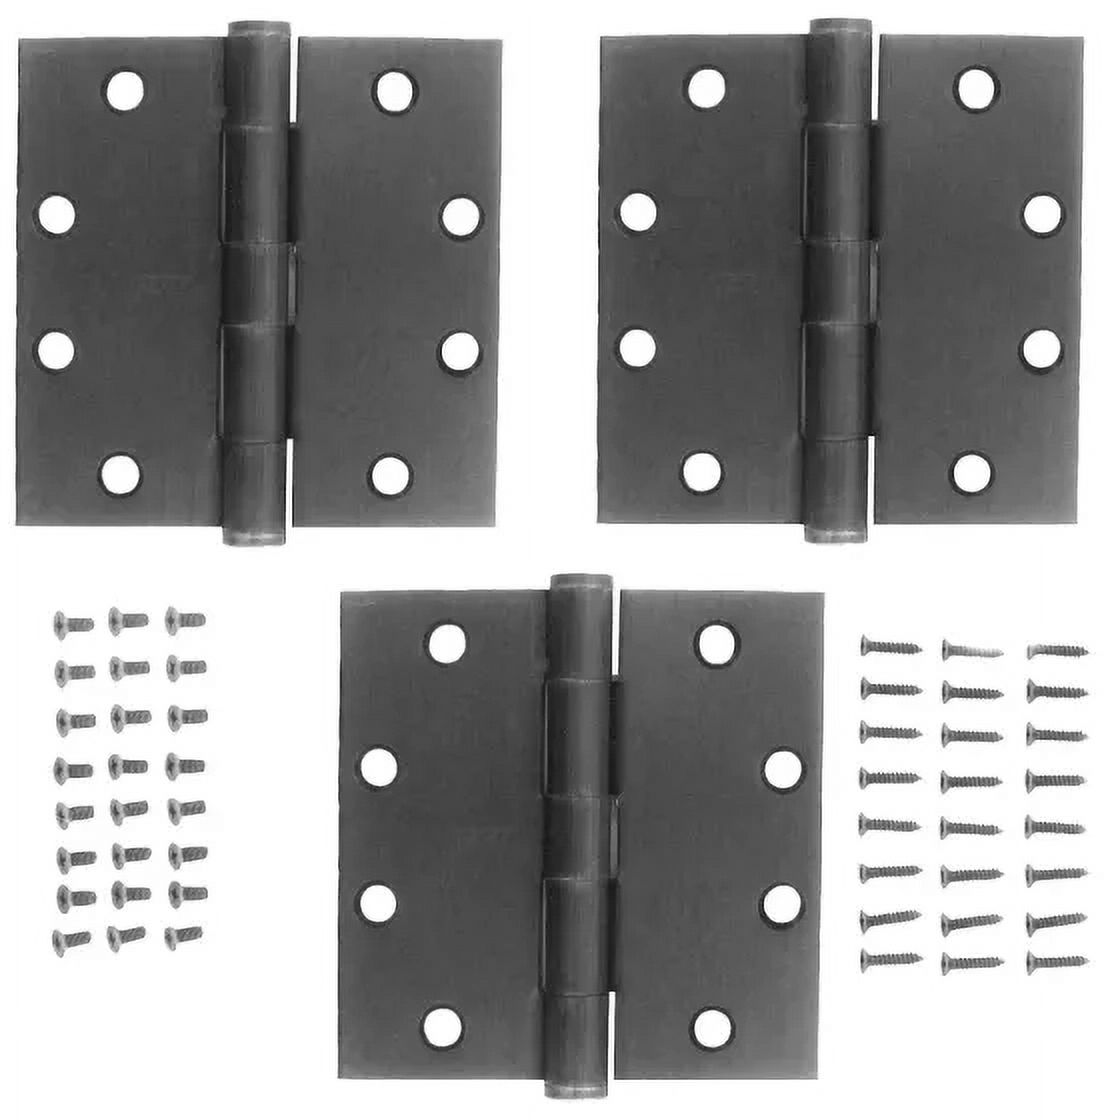 National Hardware S820-688 Stanley Commercial Door Hinges 4-1/2 Inch Square Corner Antique Nickel 3 Pack, Each - image 1 of 1